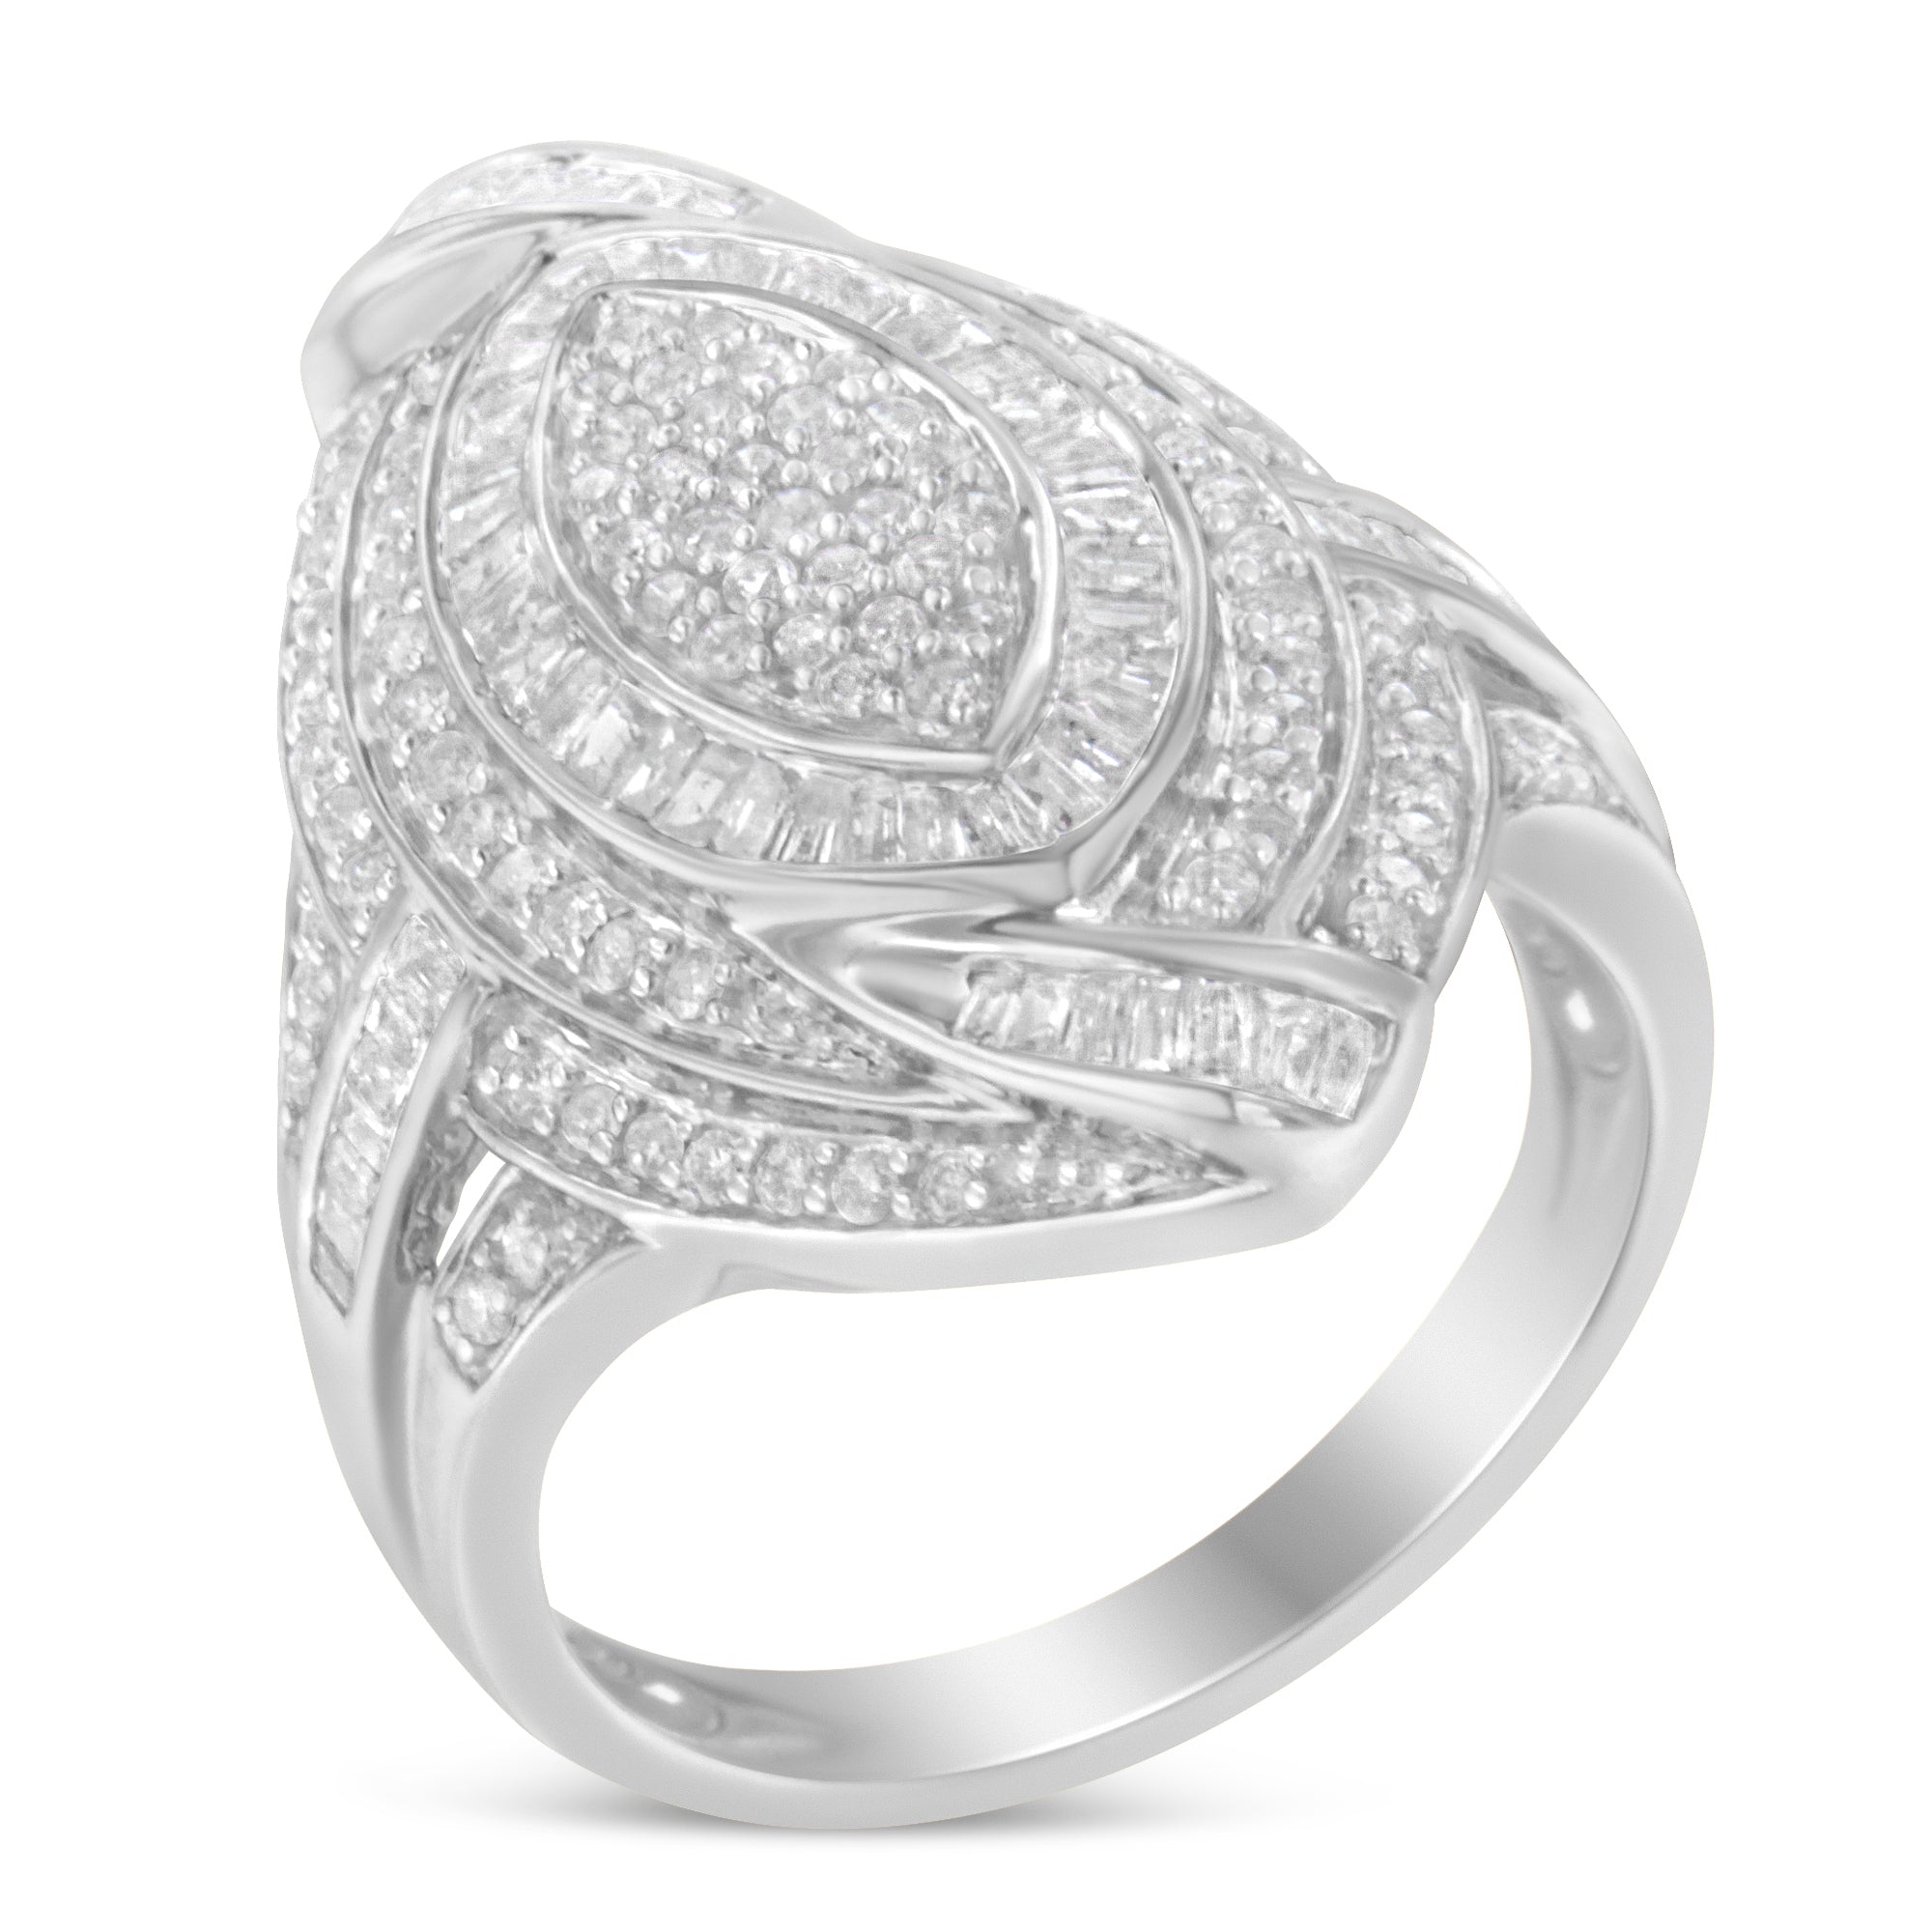 .925-Sterling-Silver-&-1-1/8-Cttw-Diamond-Marquise-Shaped-Cluster-Triple-Halo-Knot-Cocktail-Fashion-Ring-(I-J-Color,-I2-I3-Clarity)-Size-6-1/4-Rings